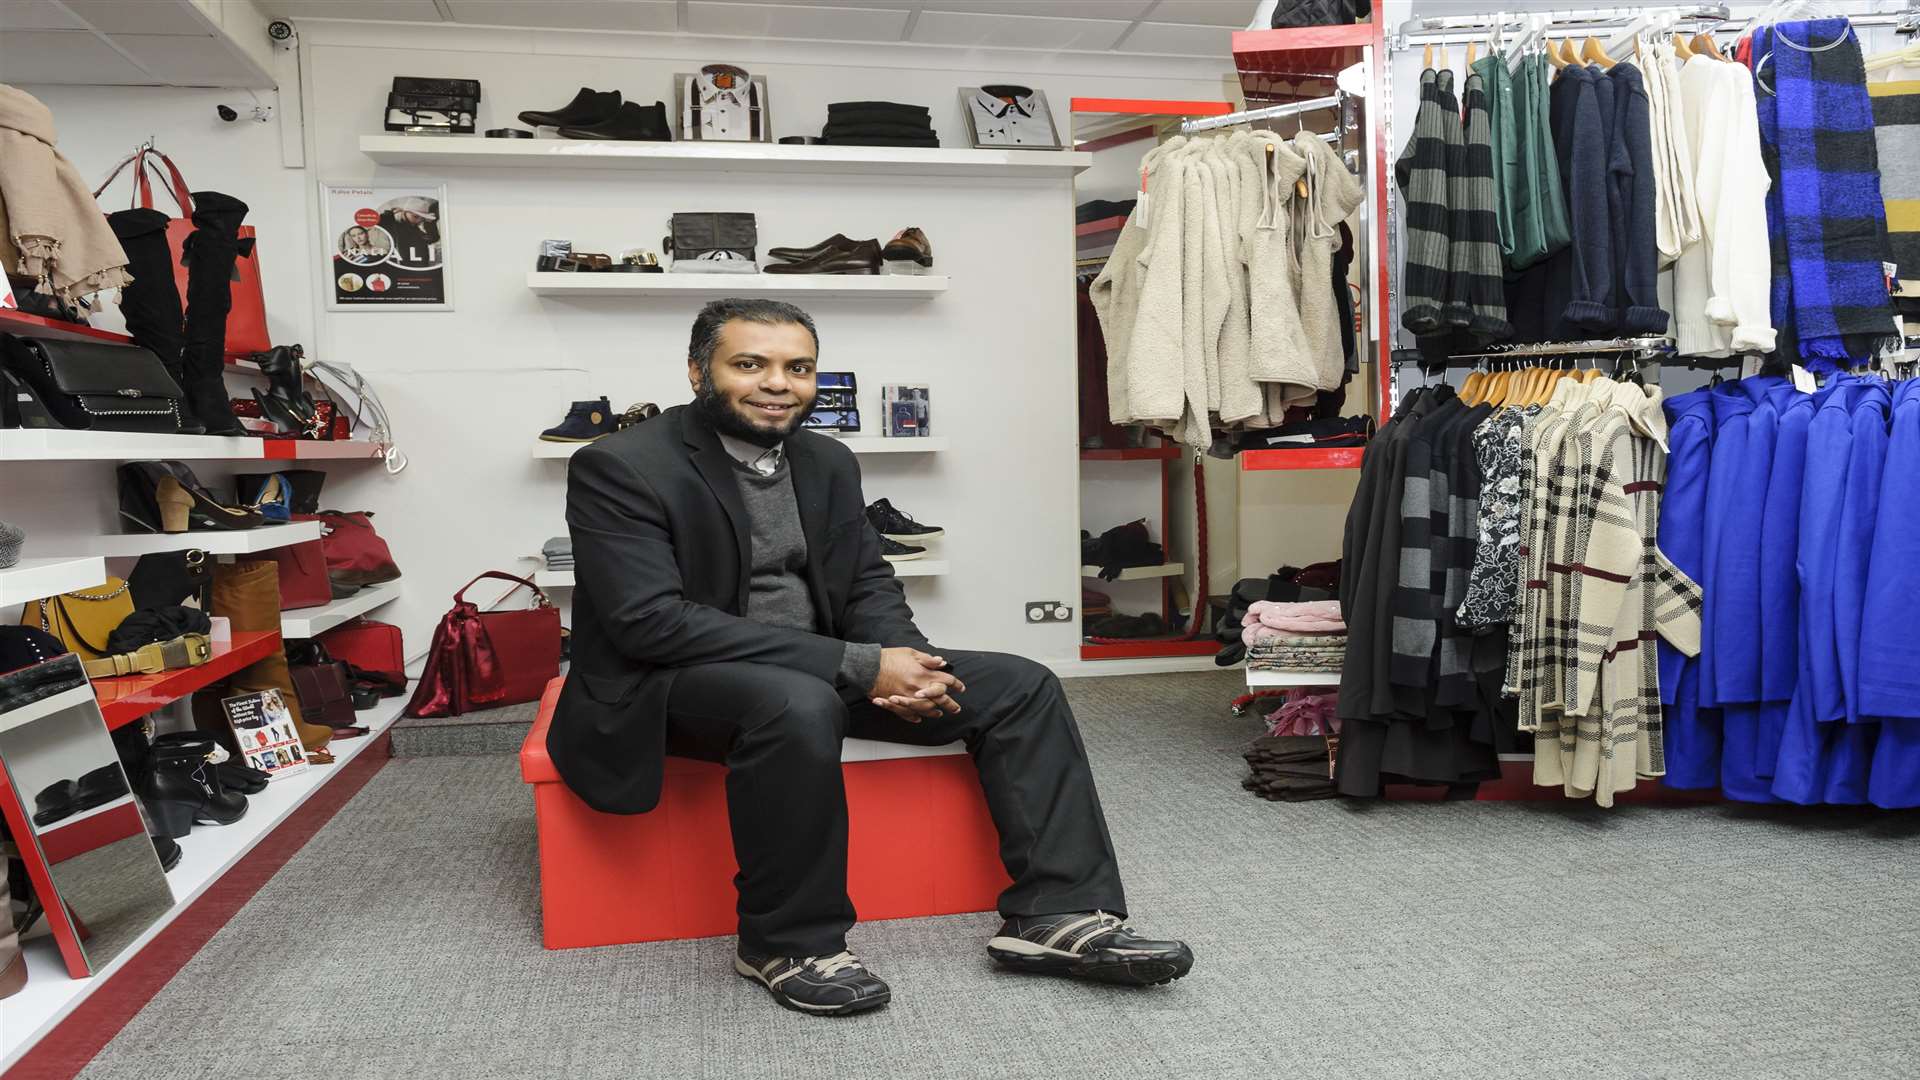 Mohammed Sadik stopped working for a supermarket to opening his own boutique in Gravesend.